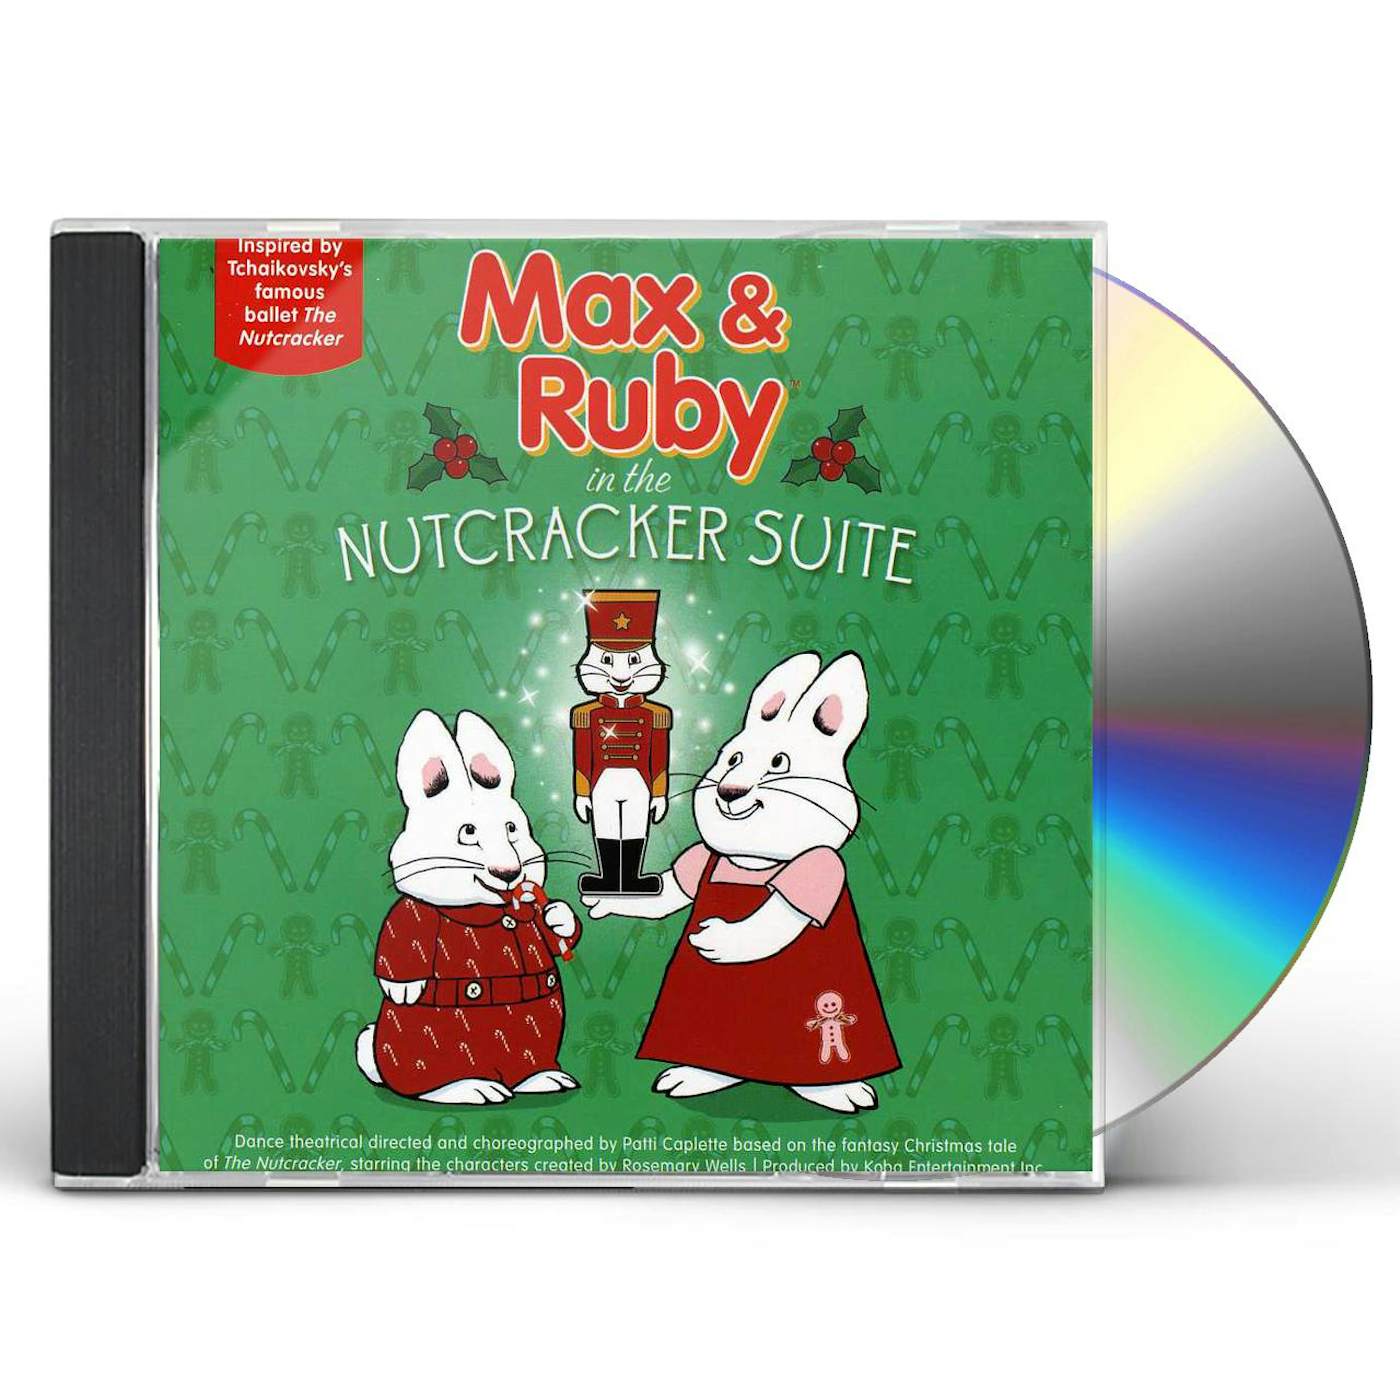 MAX & RUBY IN THE NUTCRACKER SUITE CD